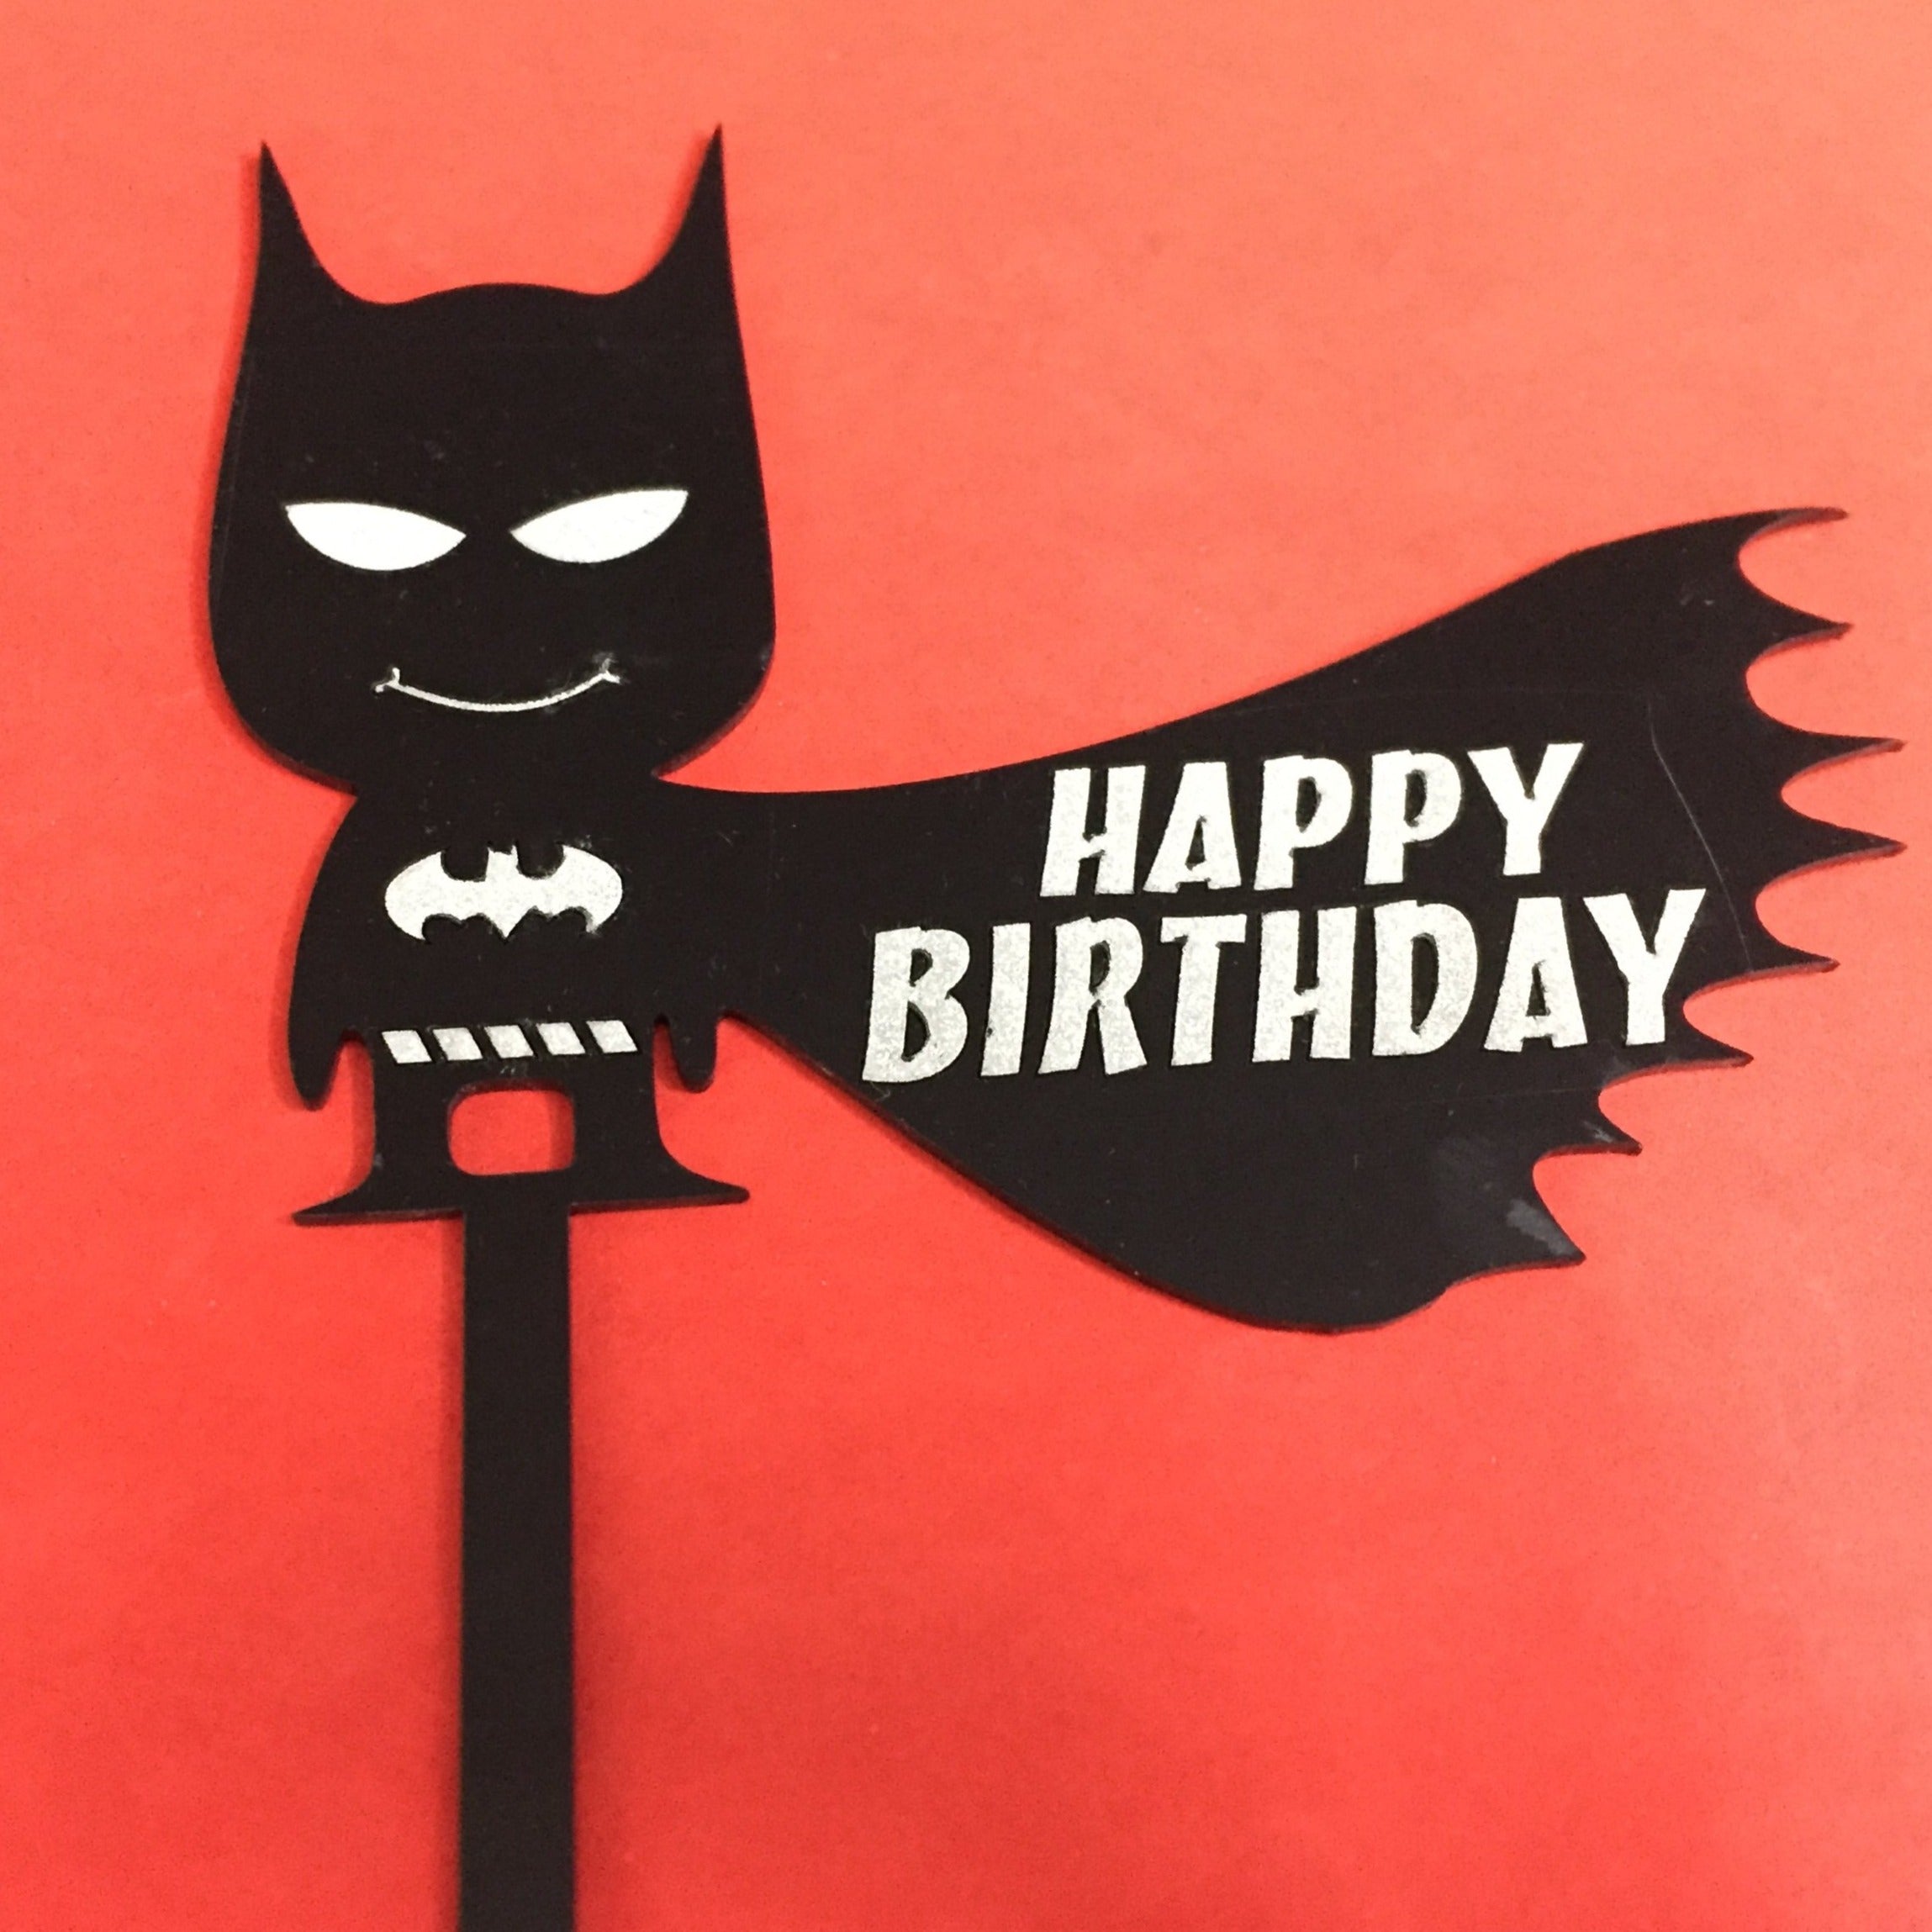 Batman Happy Birthday Cake Topper - HBDTCT002 – Cake Toppers India